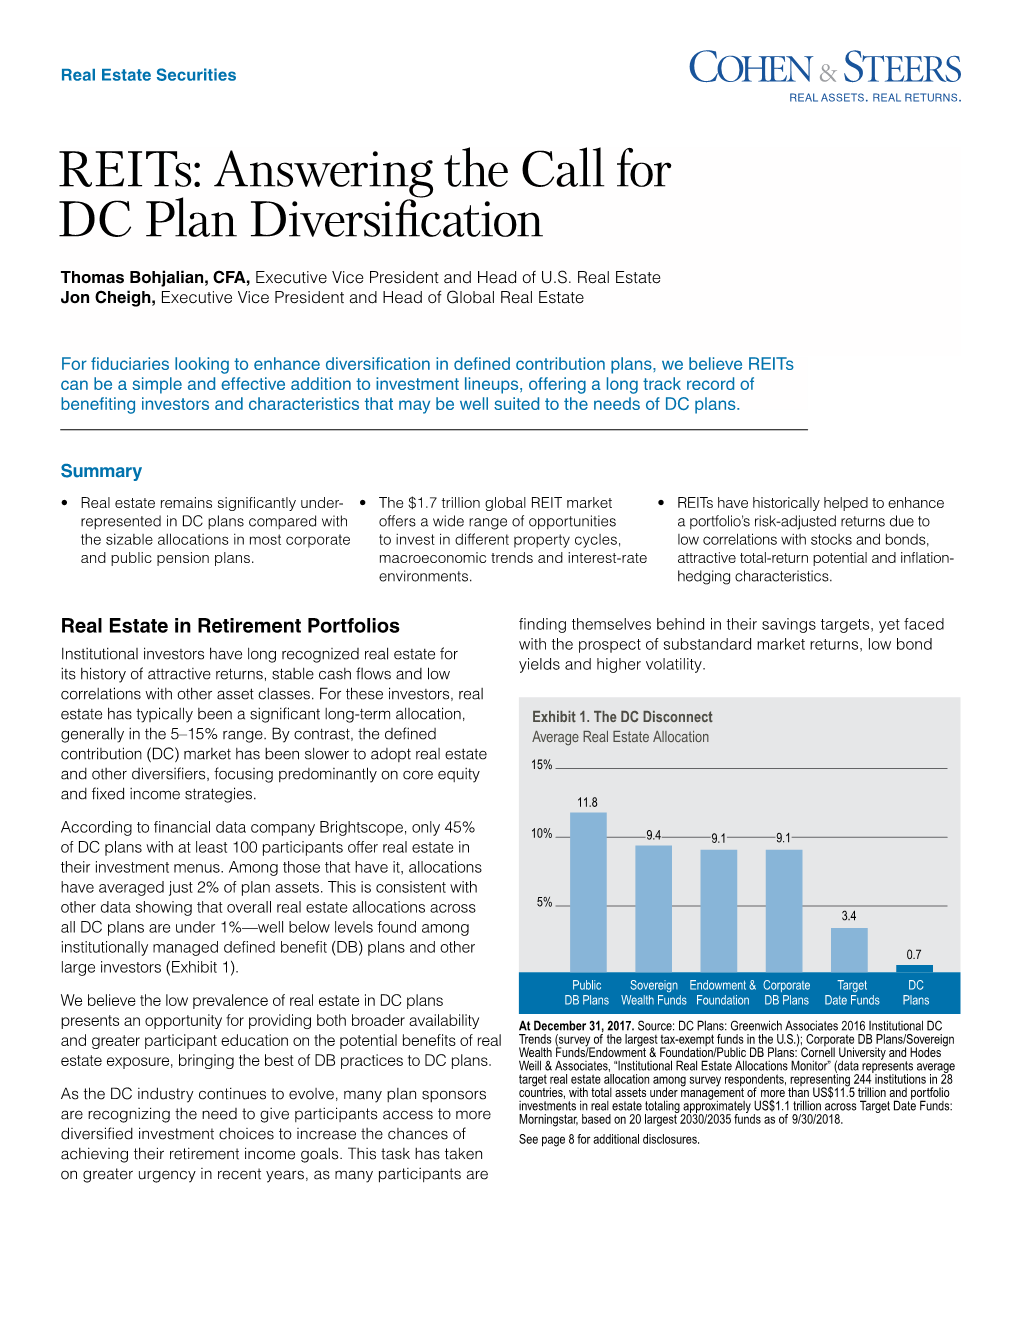 Reits: Answering the Call for DC Plan Diversification